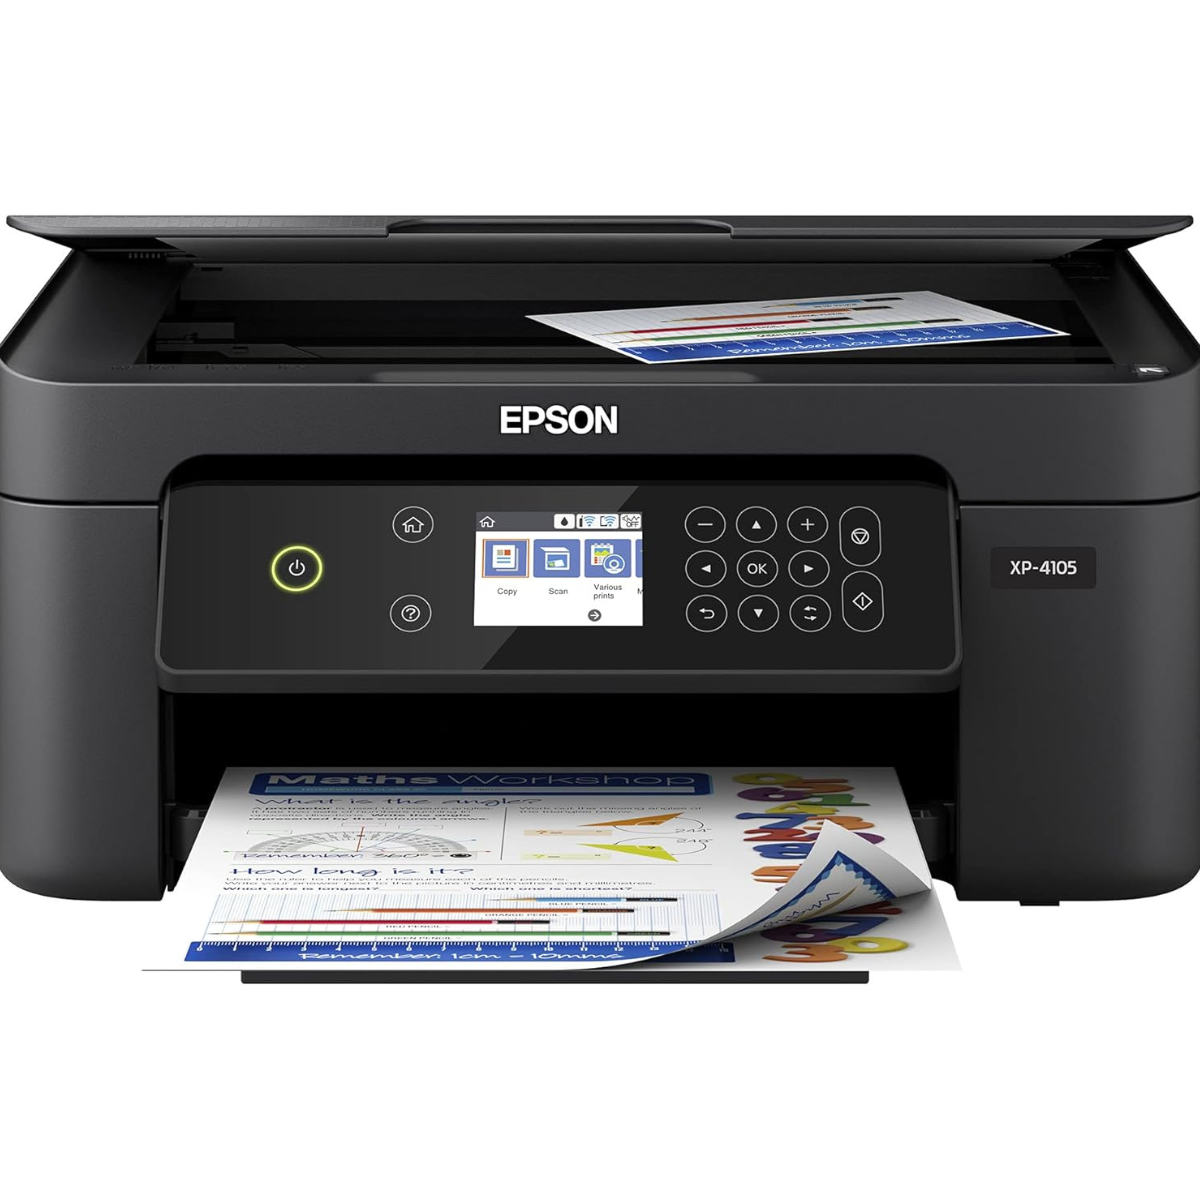 The Epson Expression Home XP-4105 All-in-One Printer